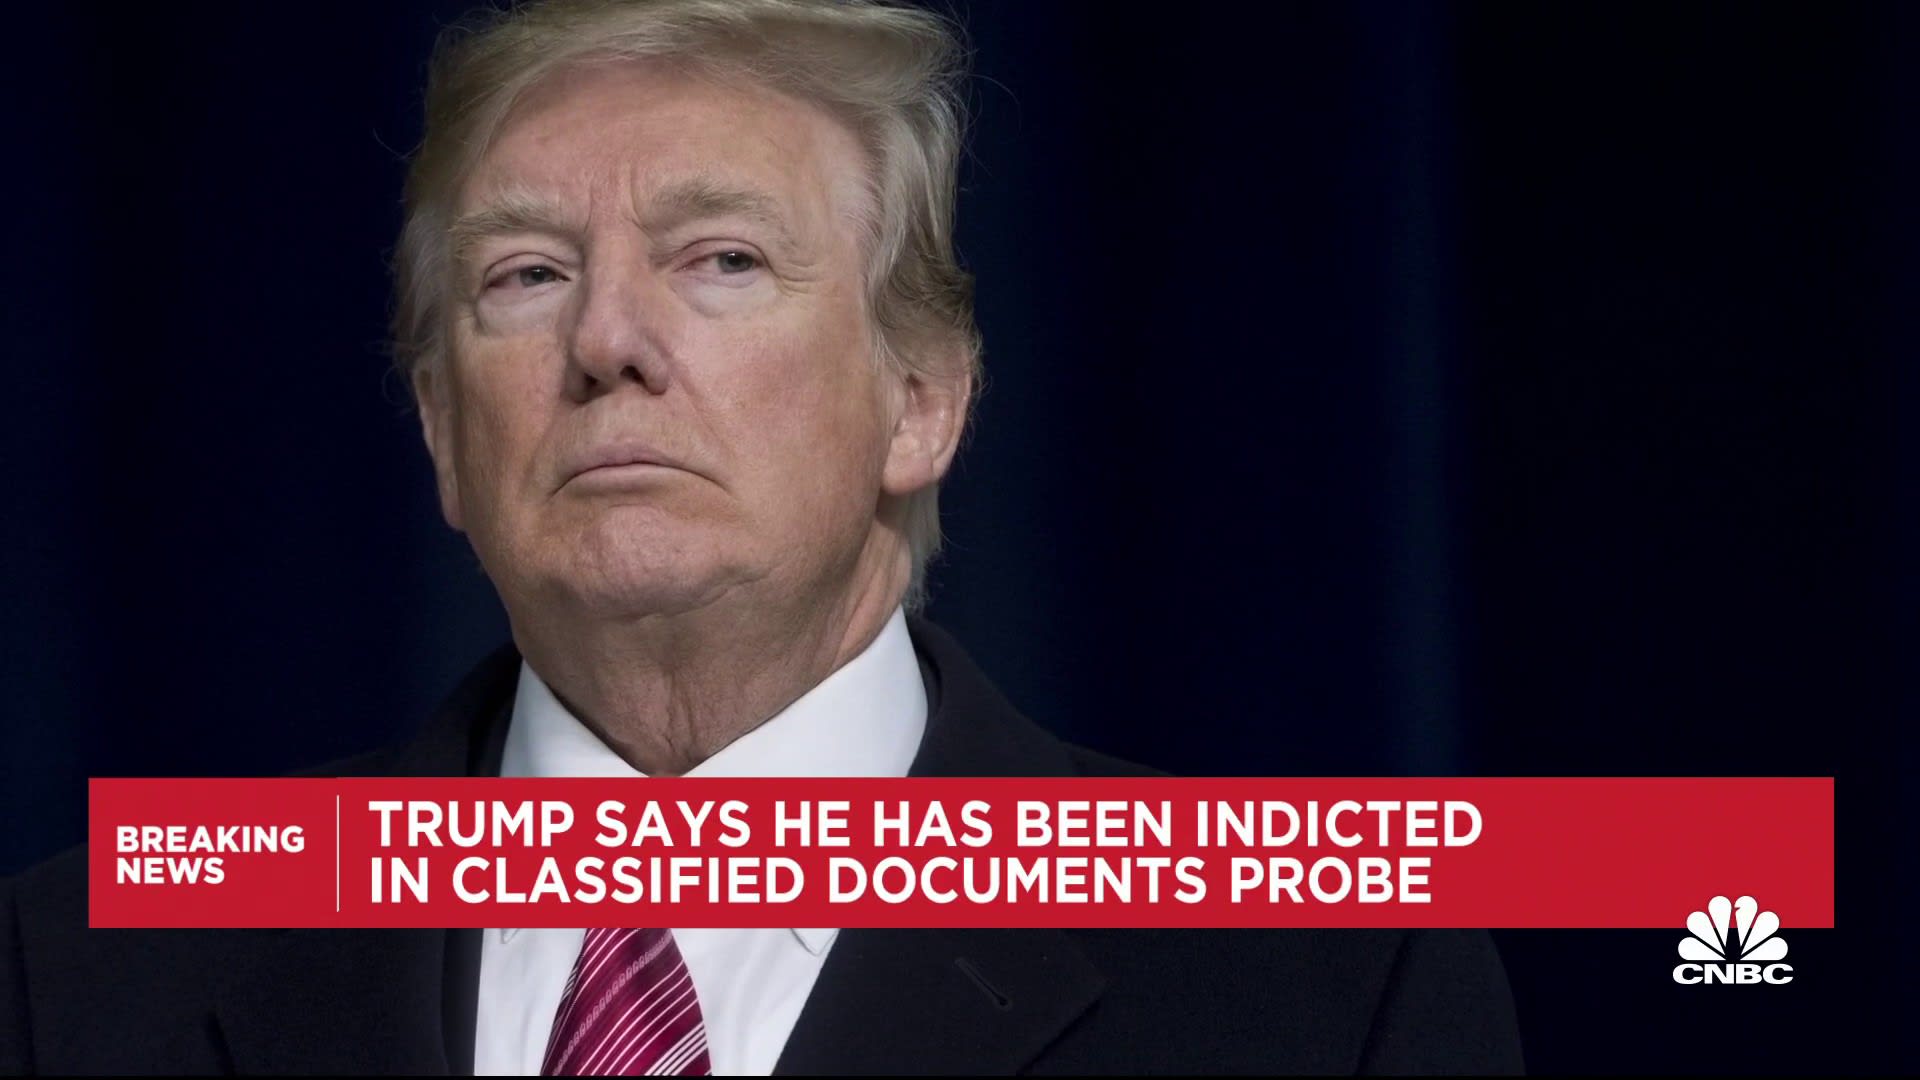 Trump indicted on seven criminal charges in classified documents case